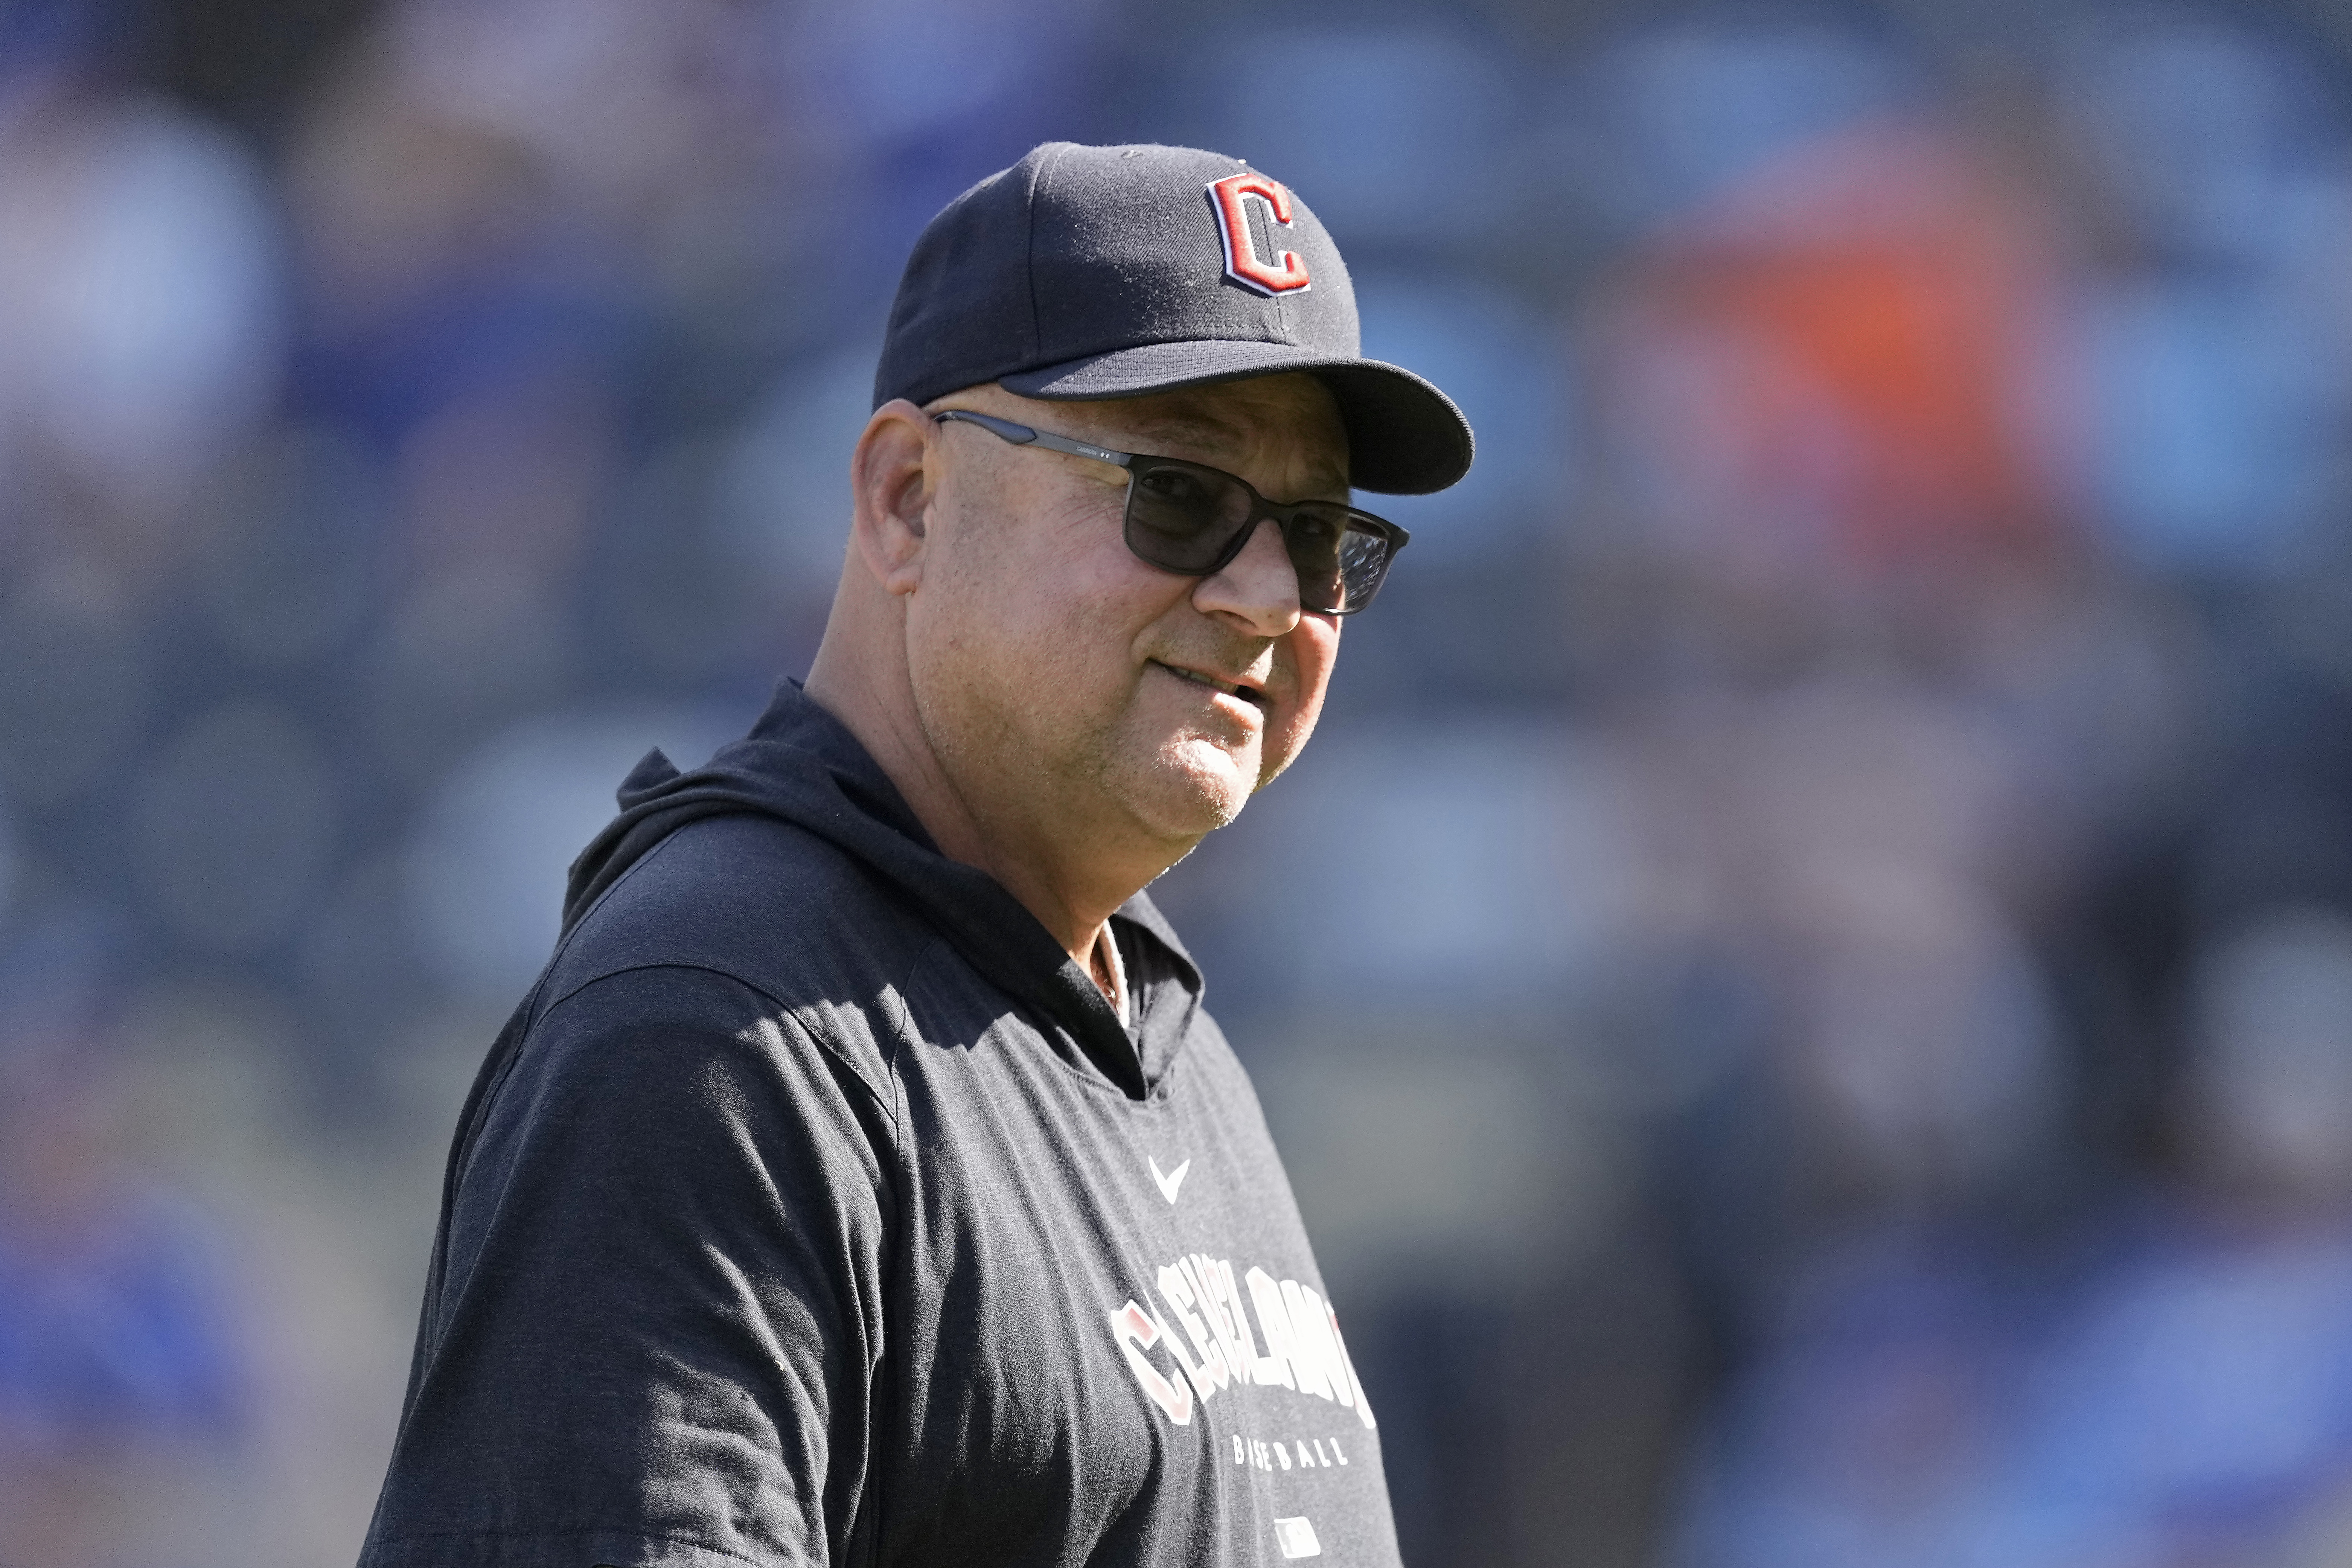 Indians manager Terry Francona has a tale to tell about stealing signs